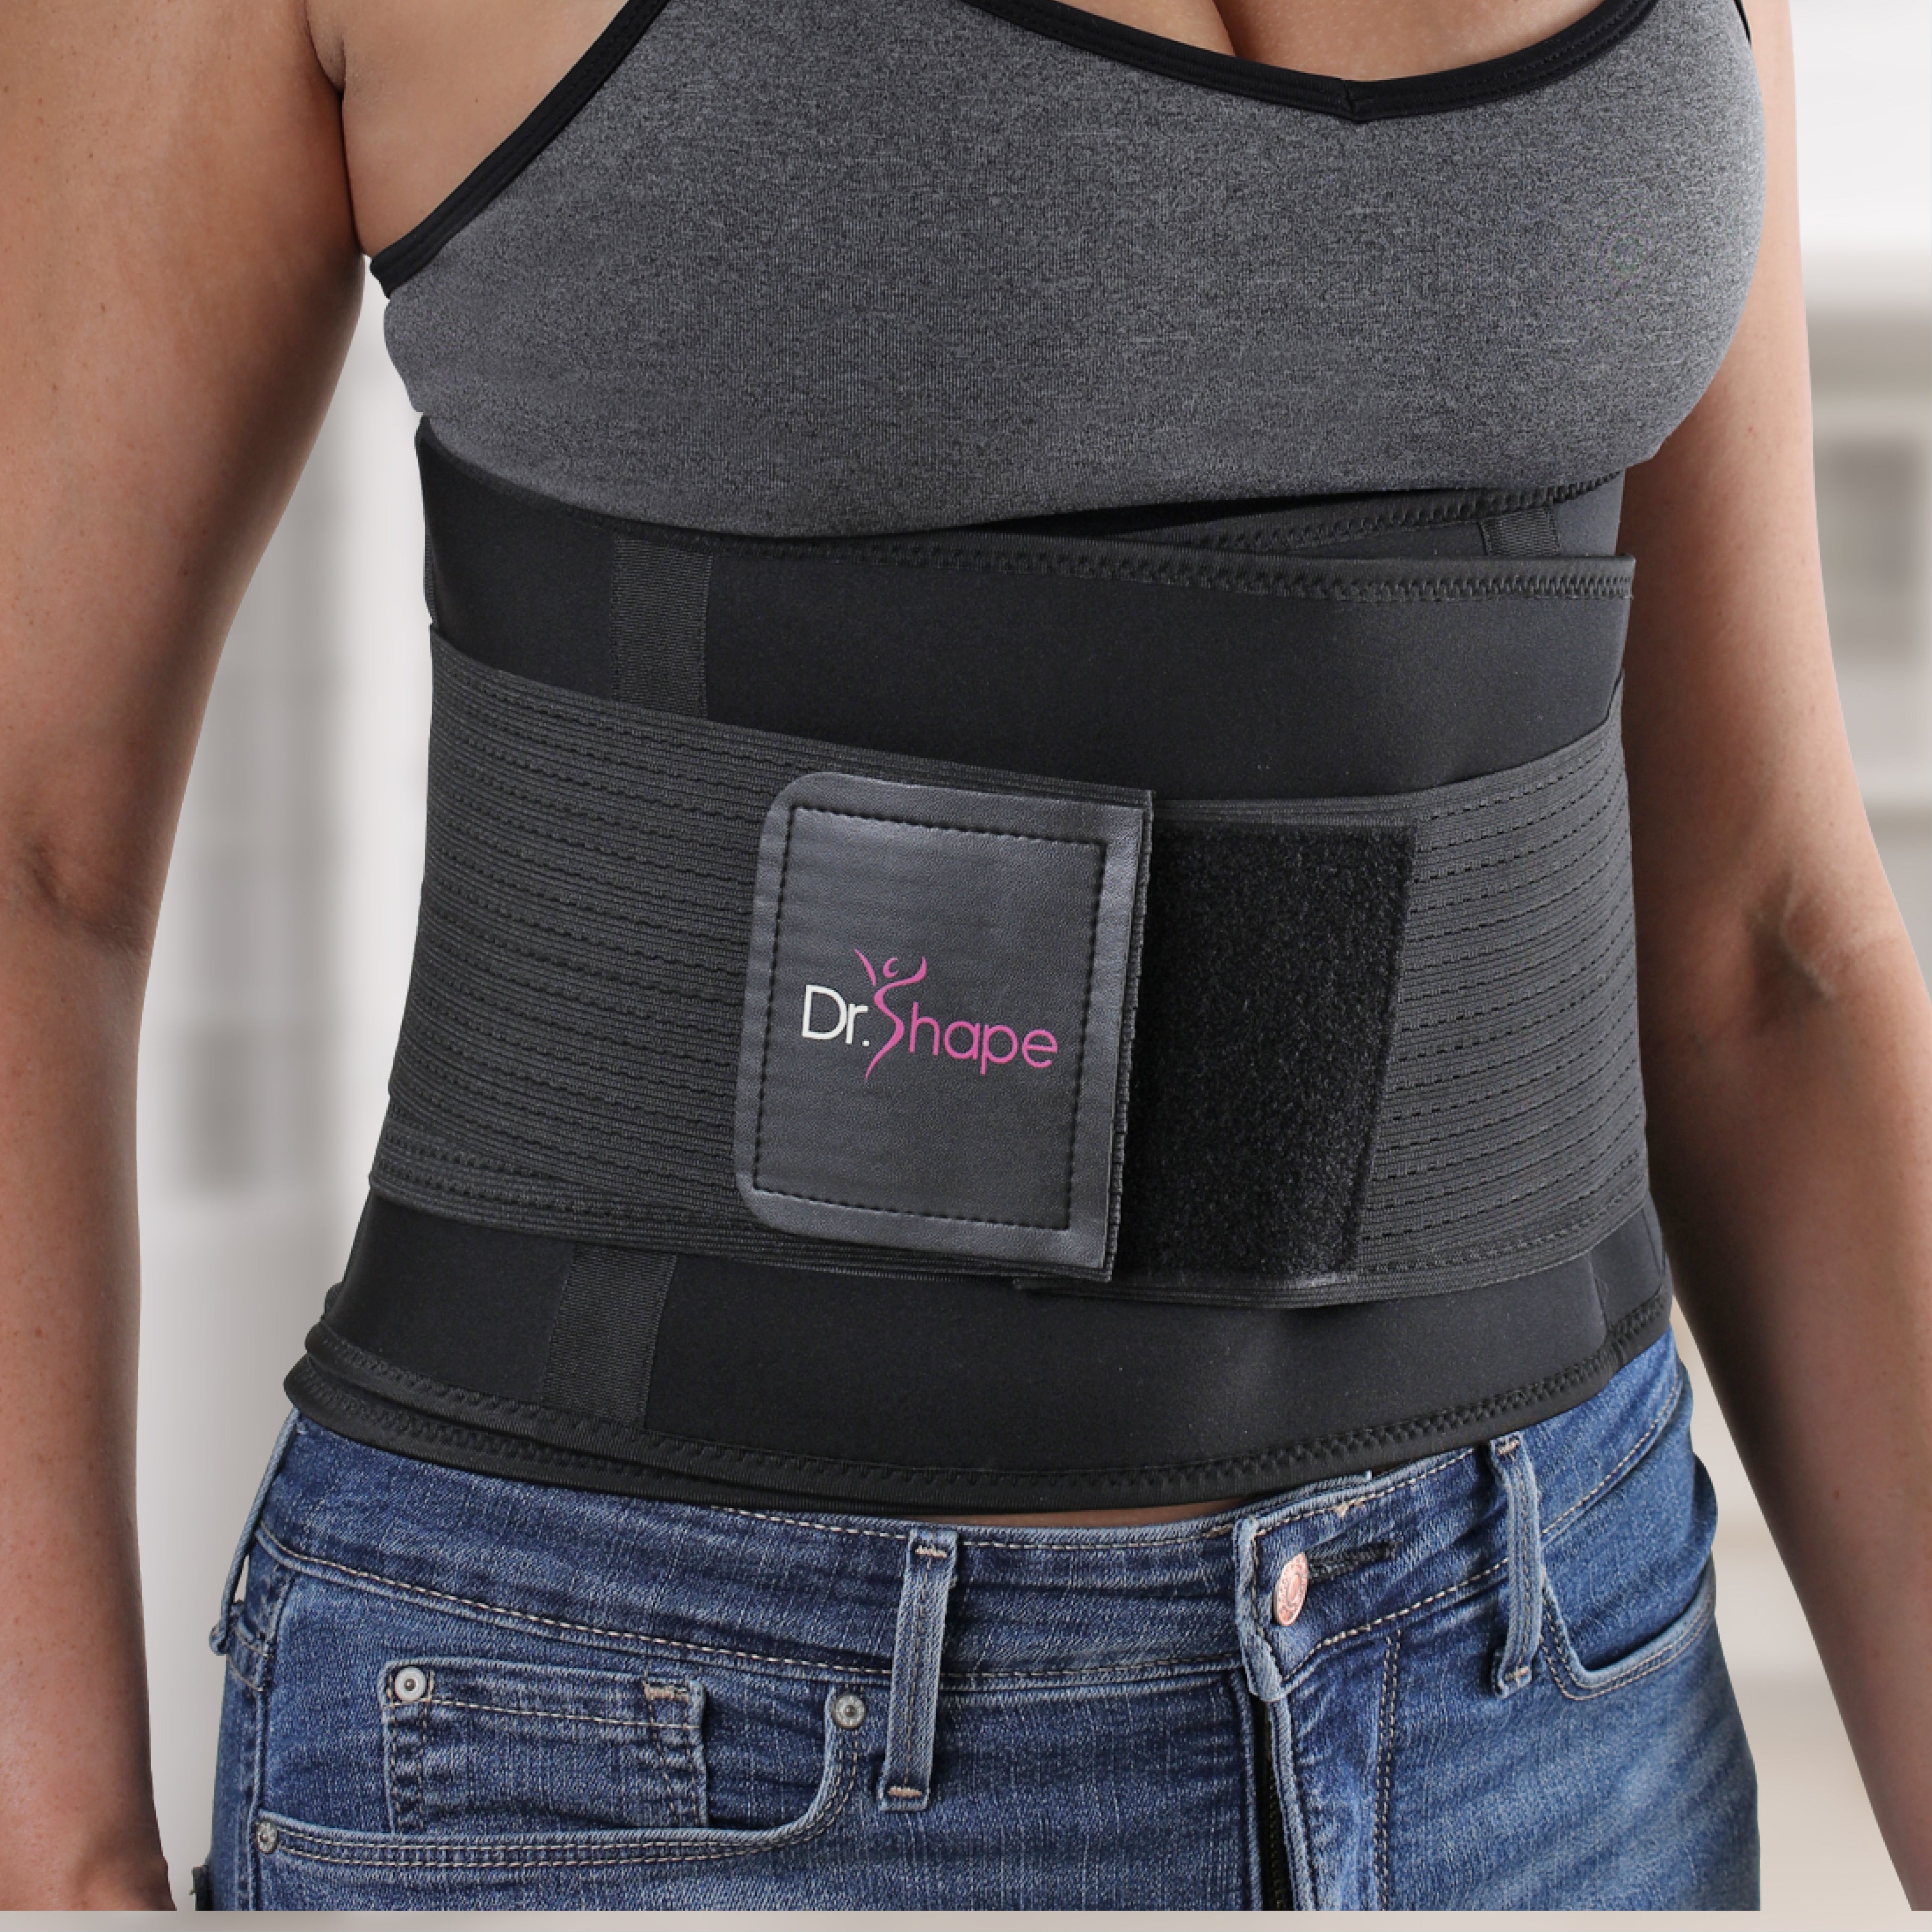 Woman wearing black waist trainer frontal view